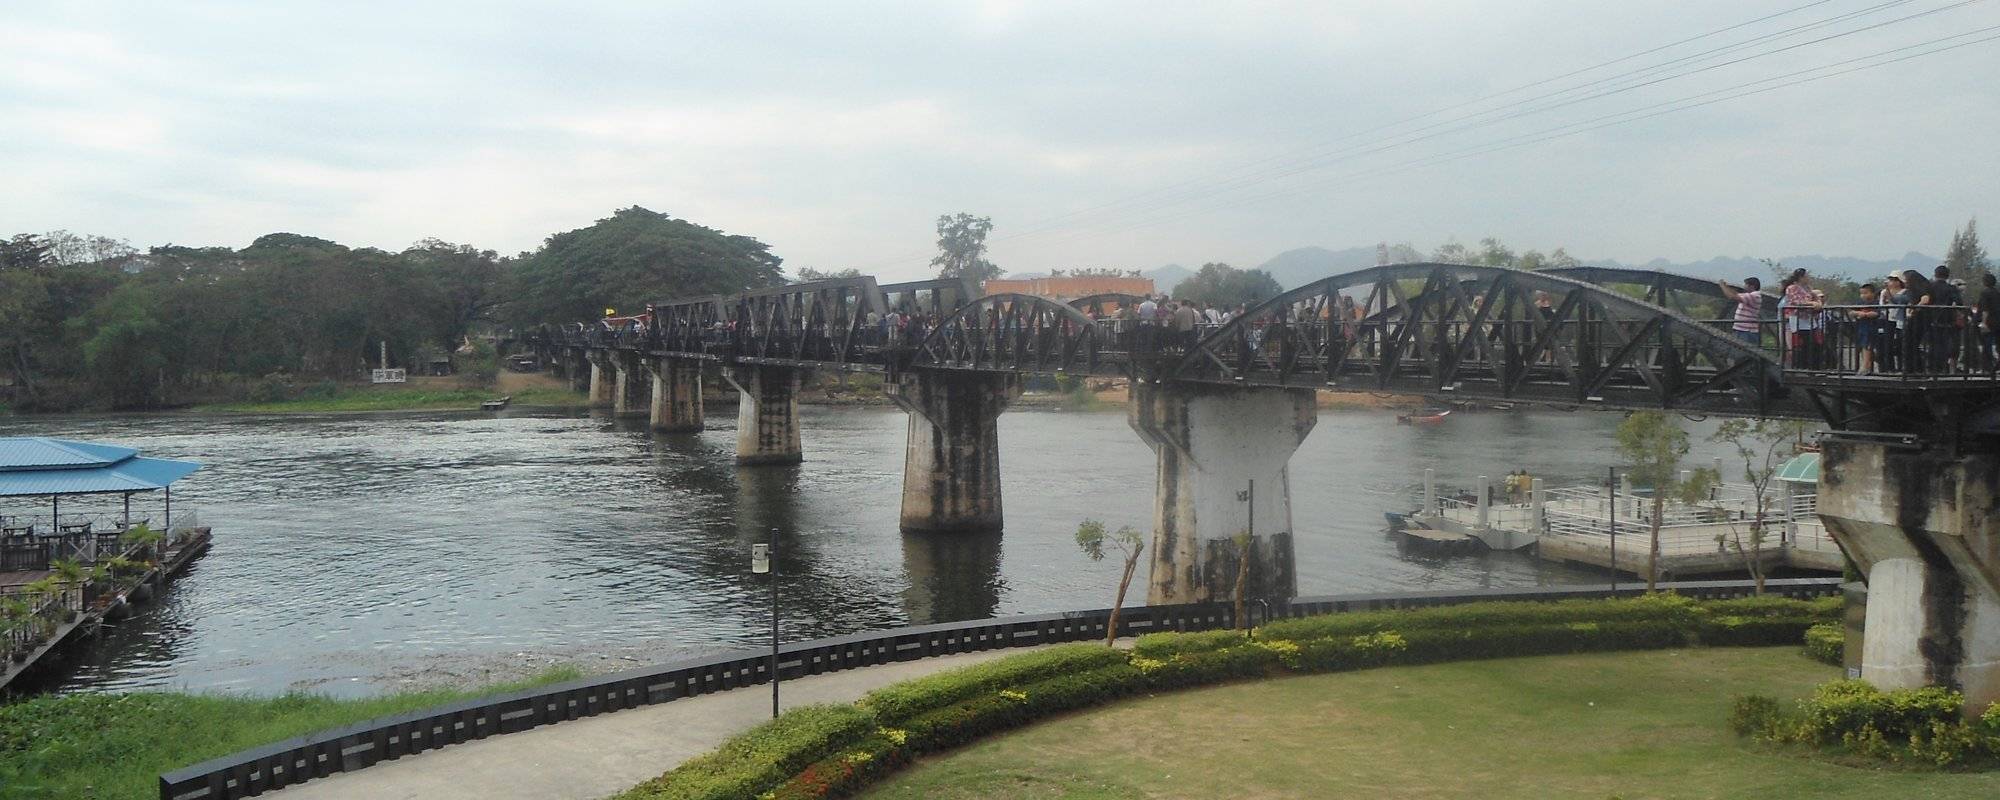 Kanchanaburi, The Bridge Over the River Kwai and the Hunt for Sergeant Wright - Part 1